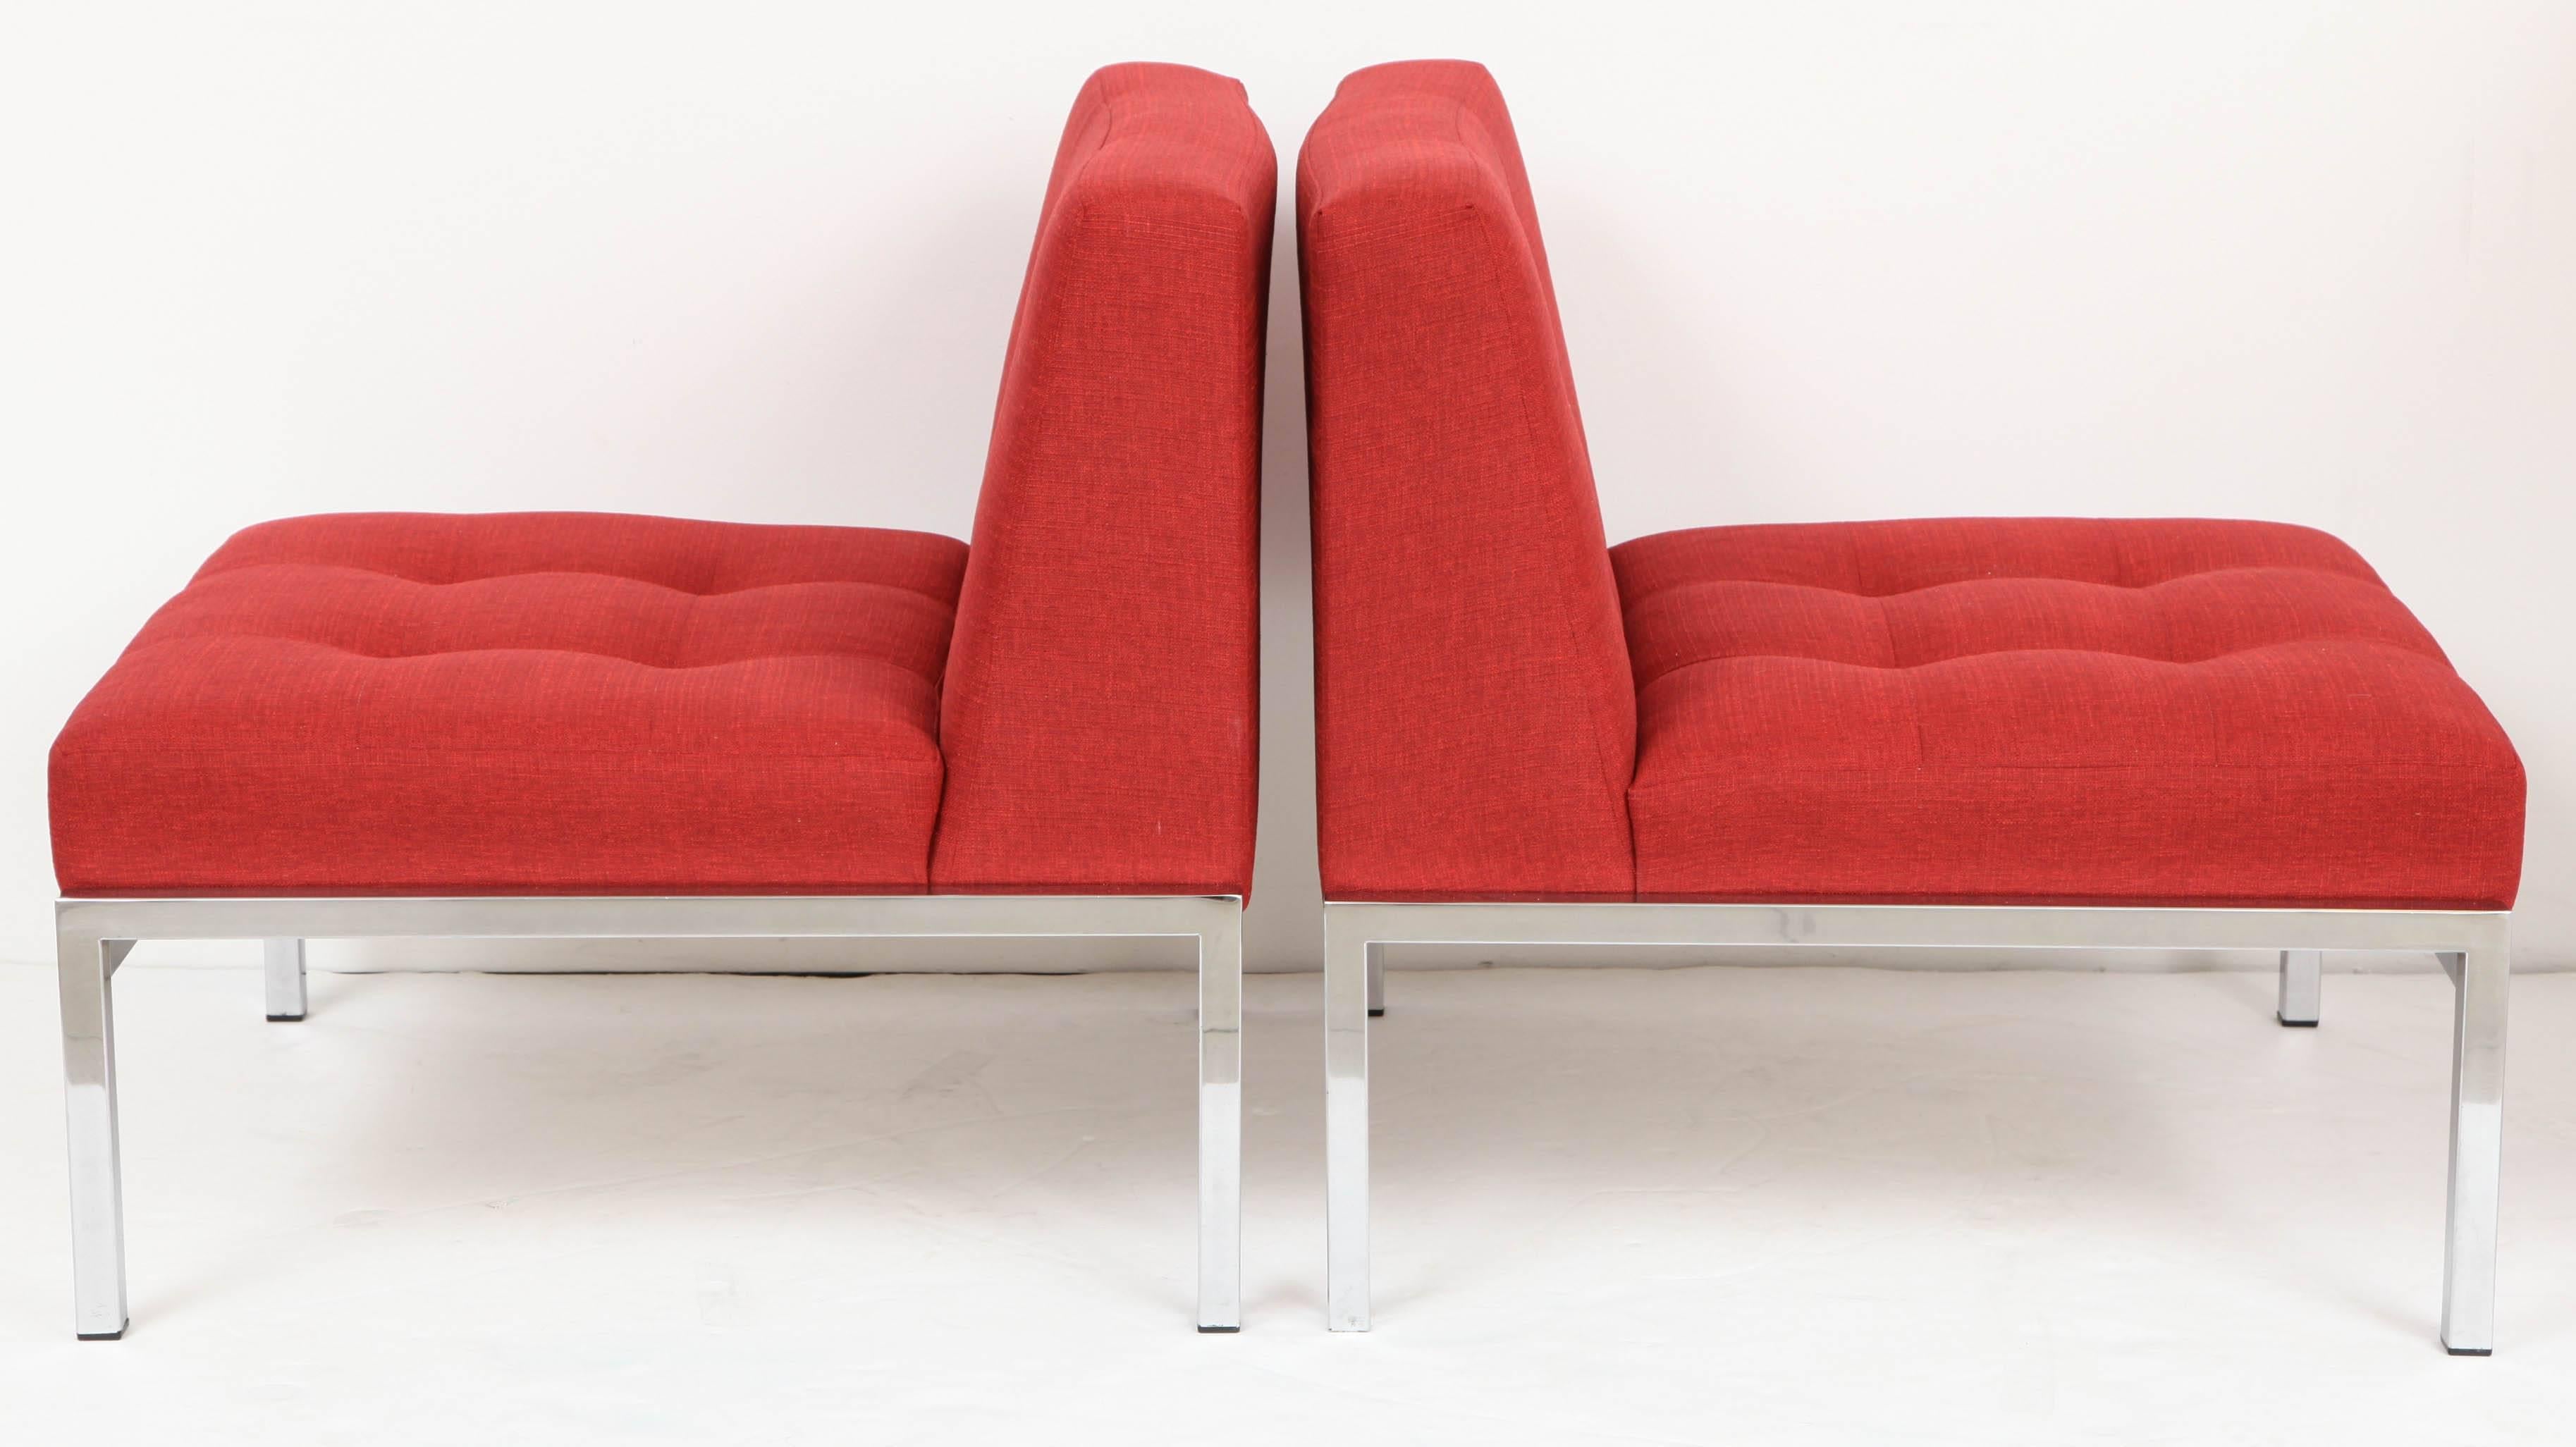 Chrome base with very comfortable seats newly recovered with a red cotton fabric